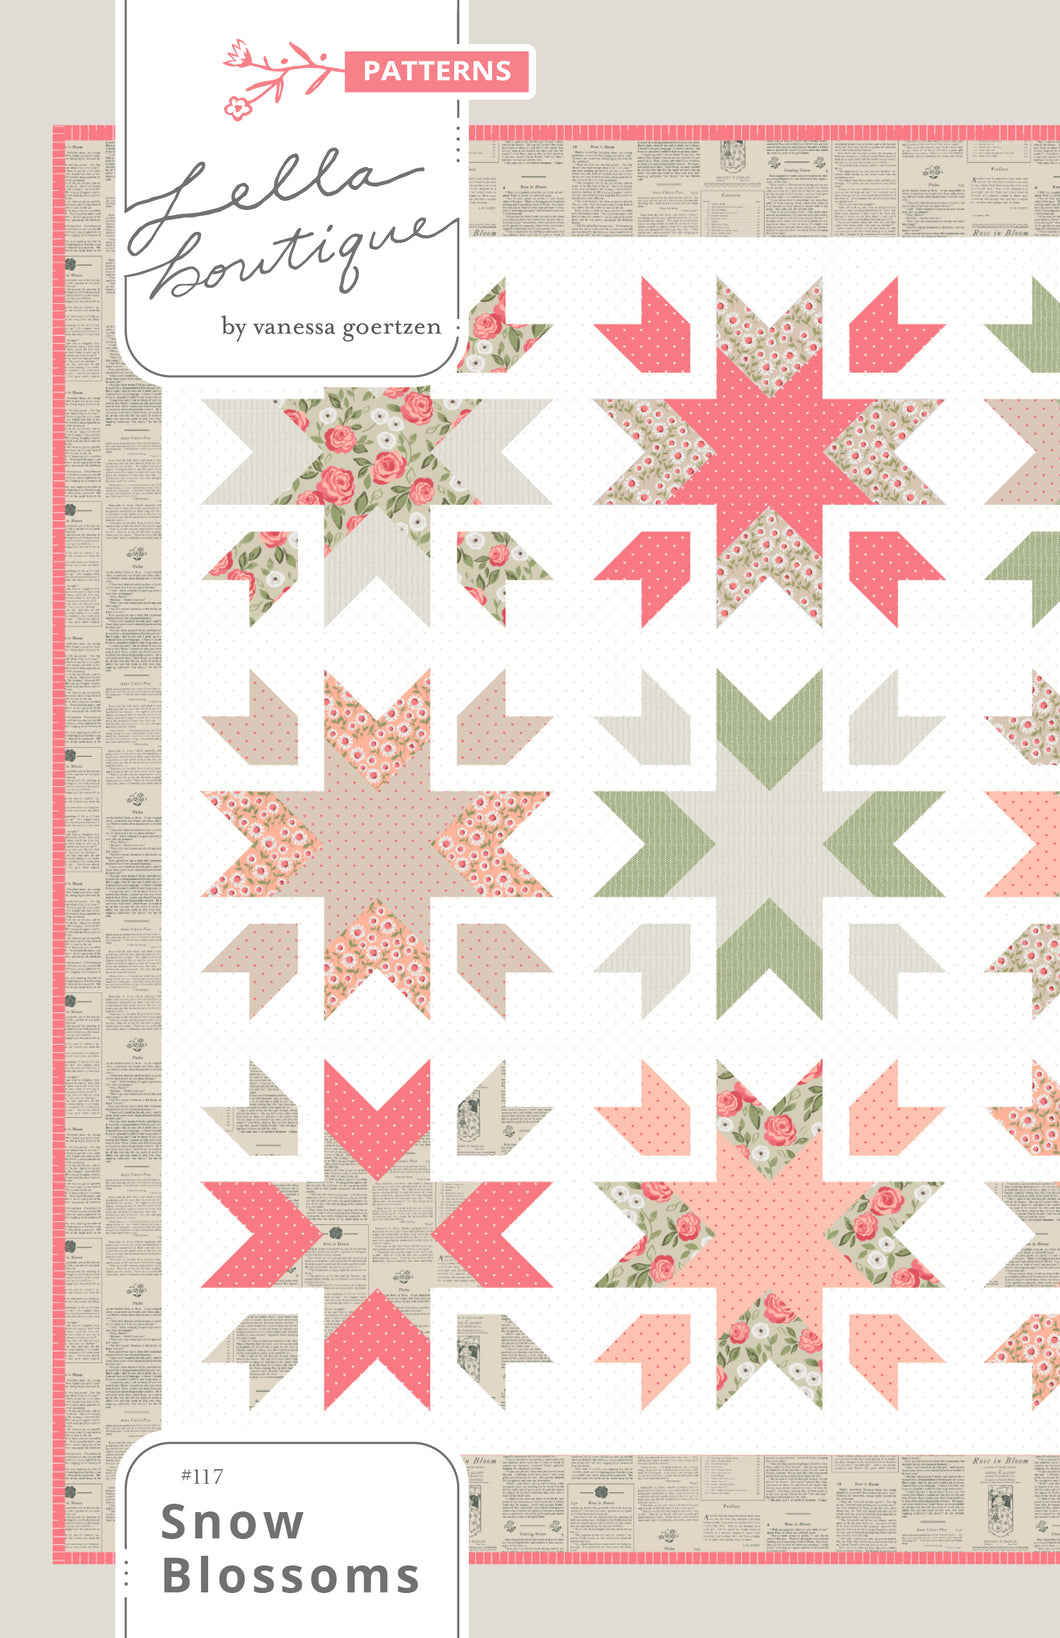 Snow Blossoms star quilt by Lella Boutique for Moda Fabrics. Make it with 9 fat quarters. Fabric is Love Note by Lella Boutique for Moda Fabrics.